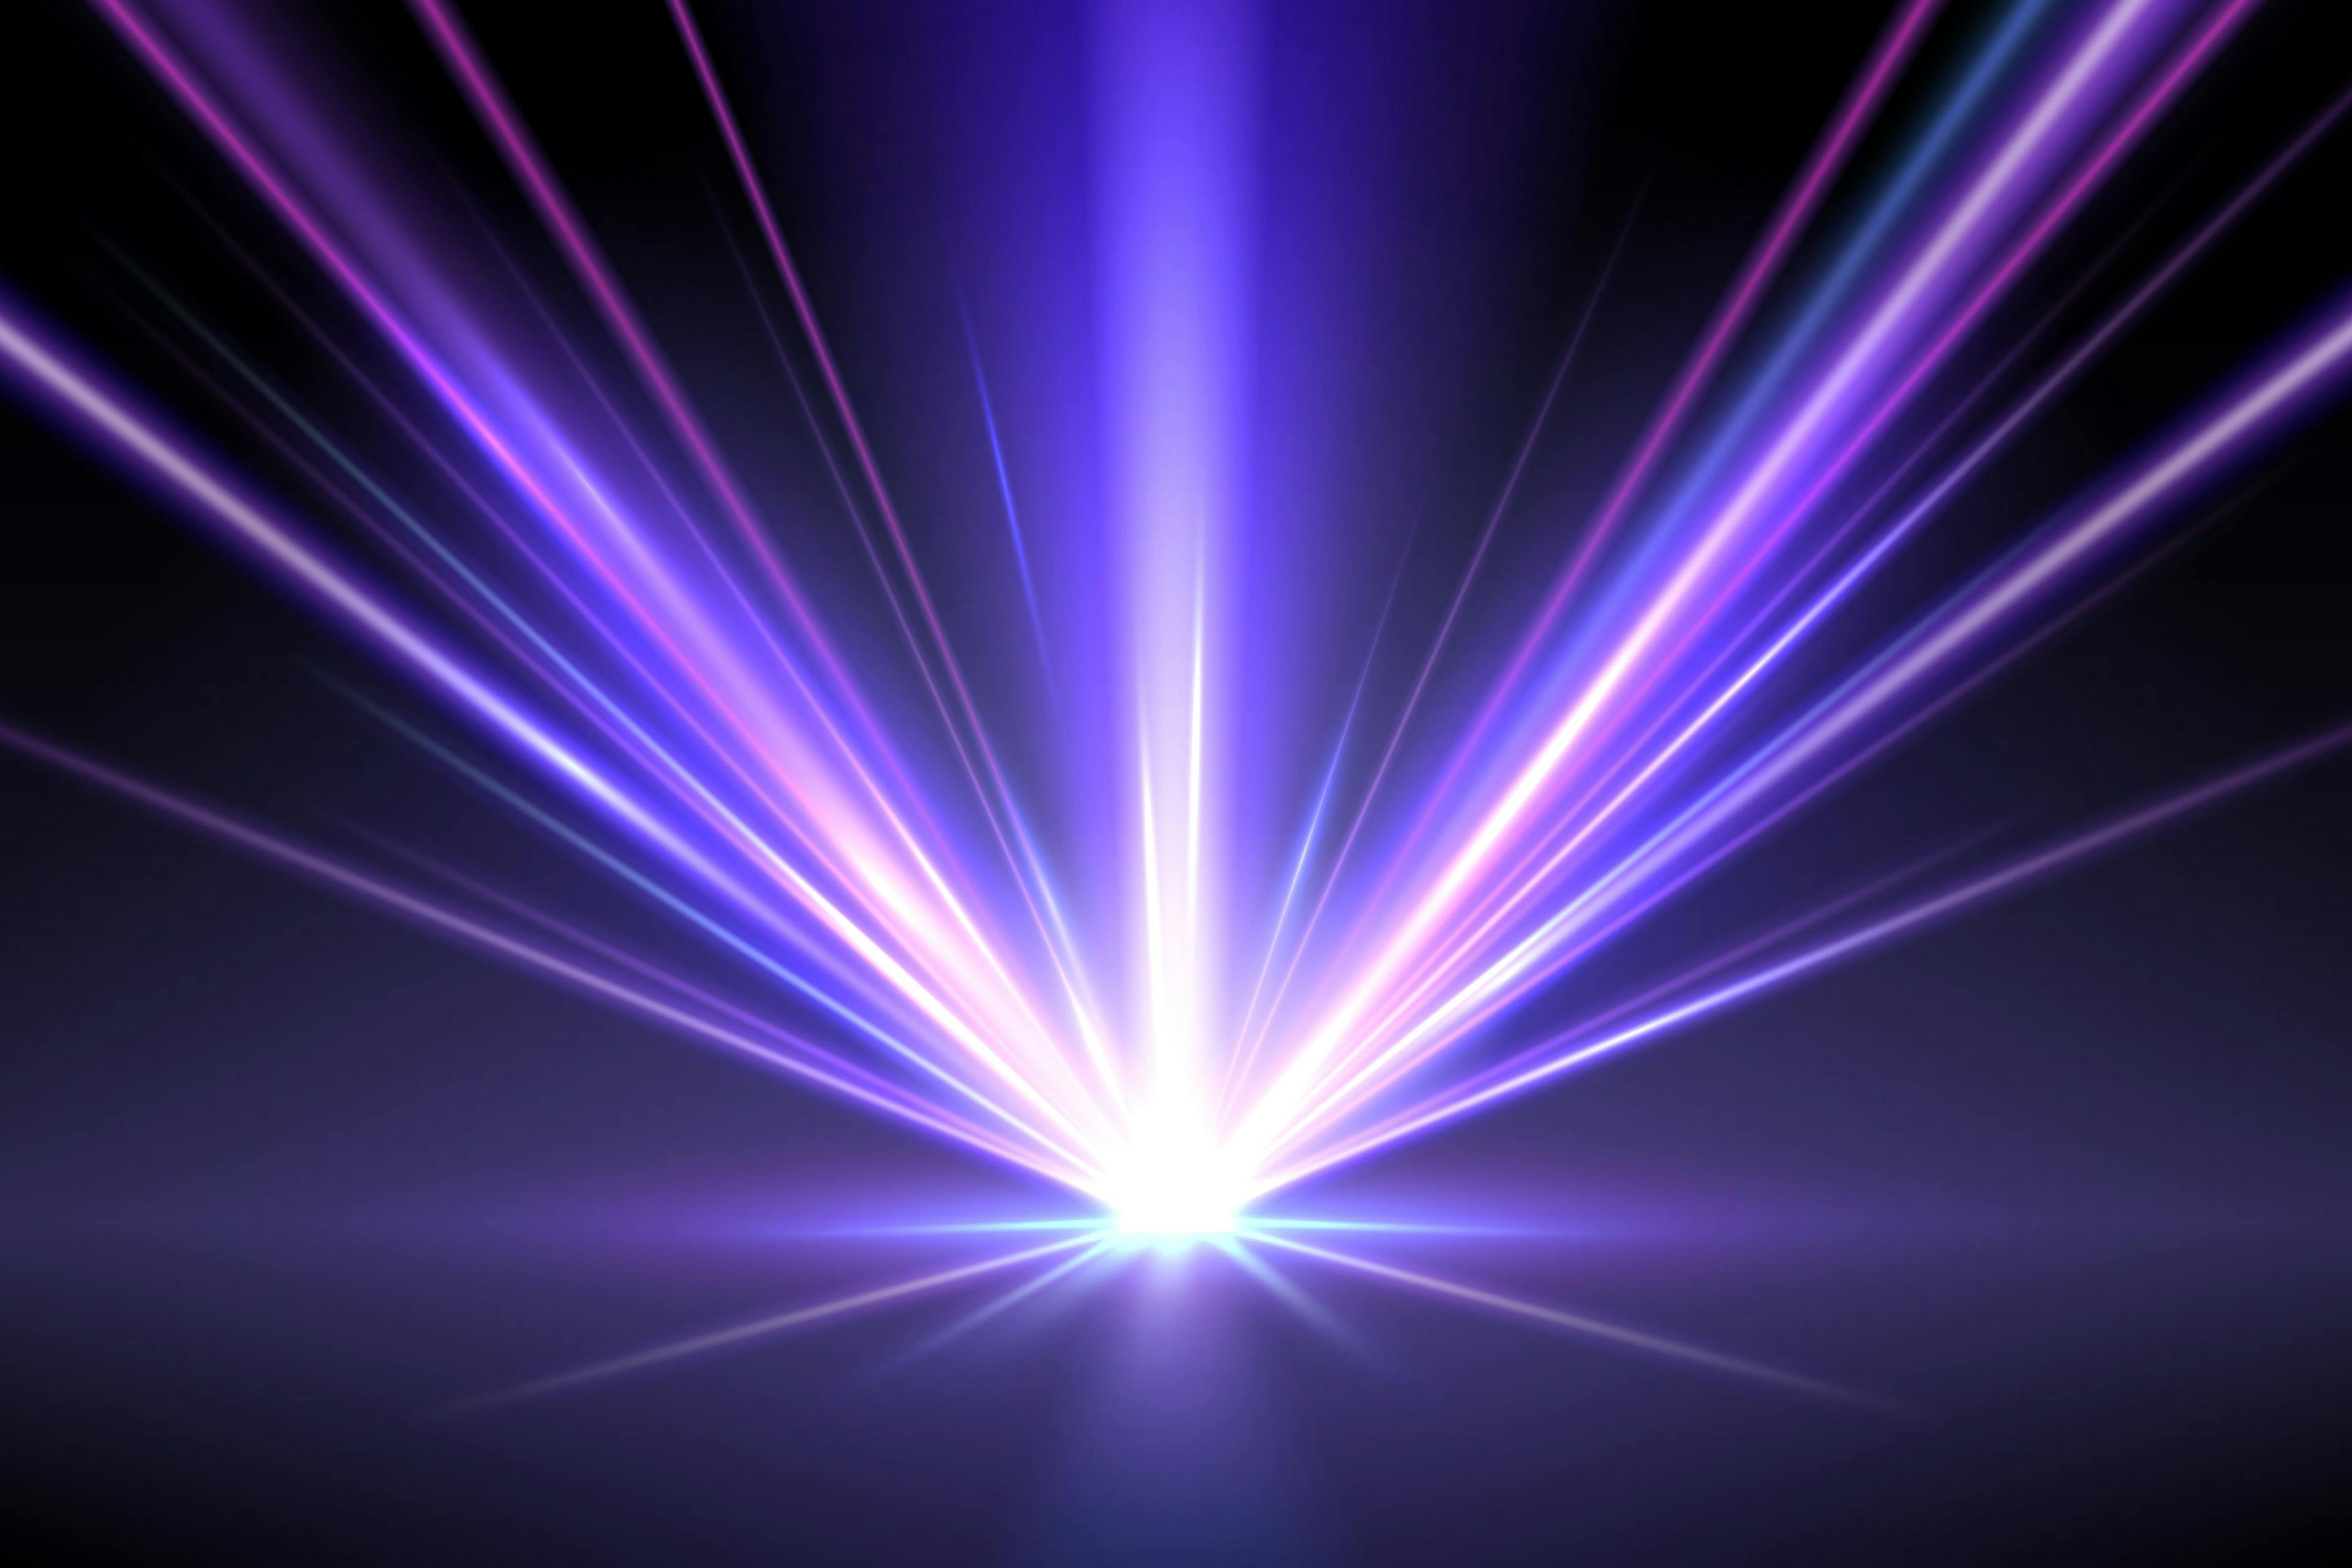 Abstract neon light rays background | Image Credit: © d1sk - stock.adobe.com